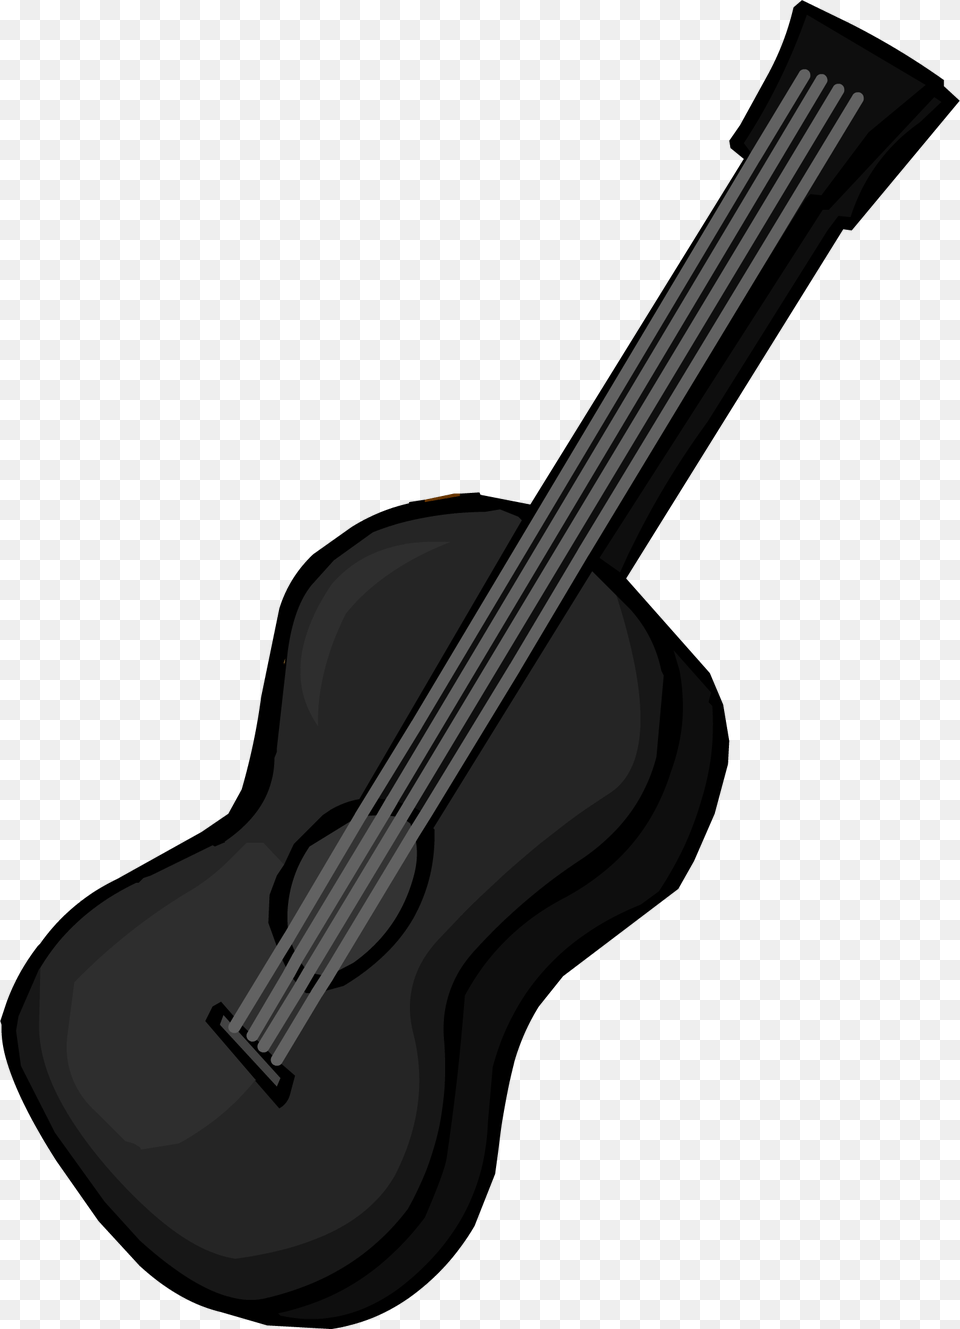 Club Penguin Rewritten Wiki Electric Guitar, Musical Instrument, Cello, Smoke Pipe Free Png Download